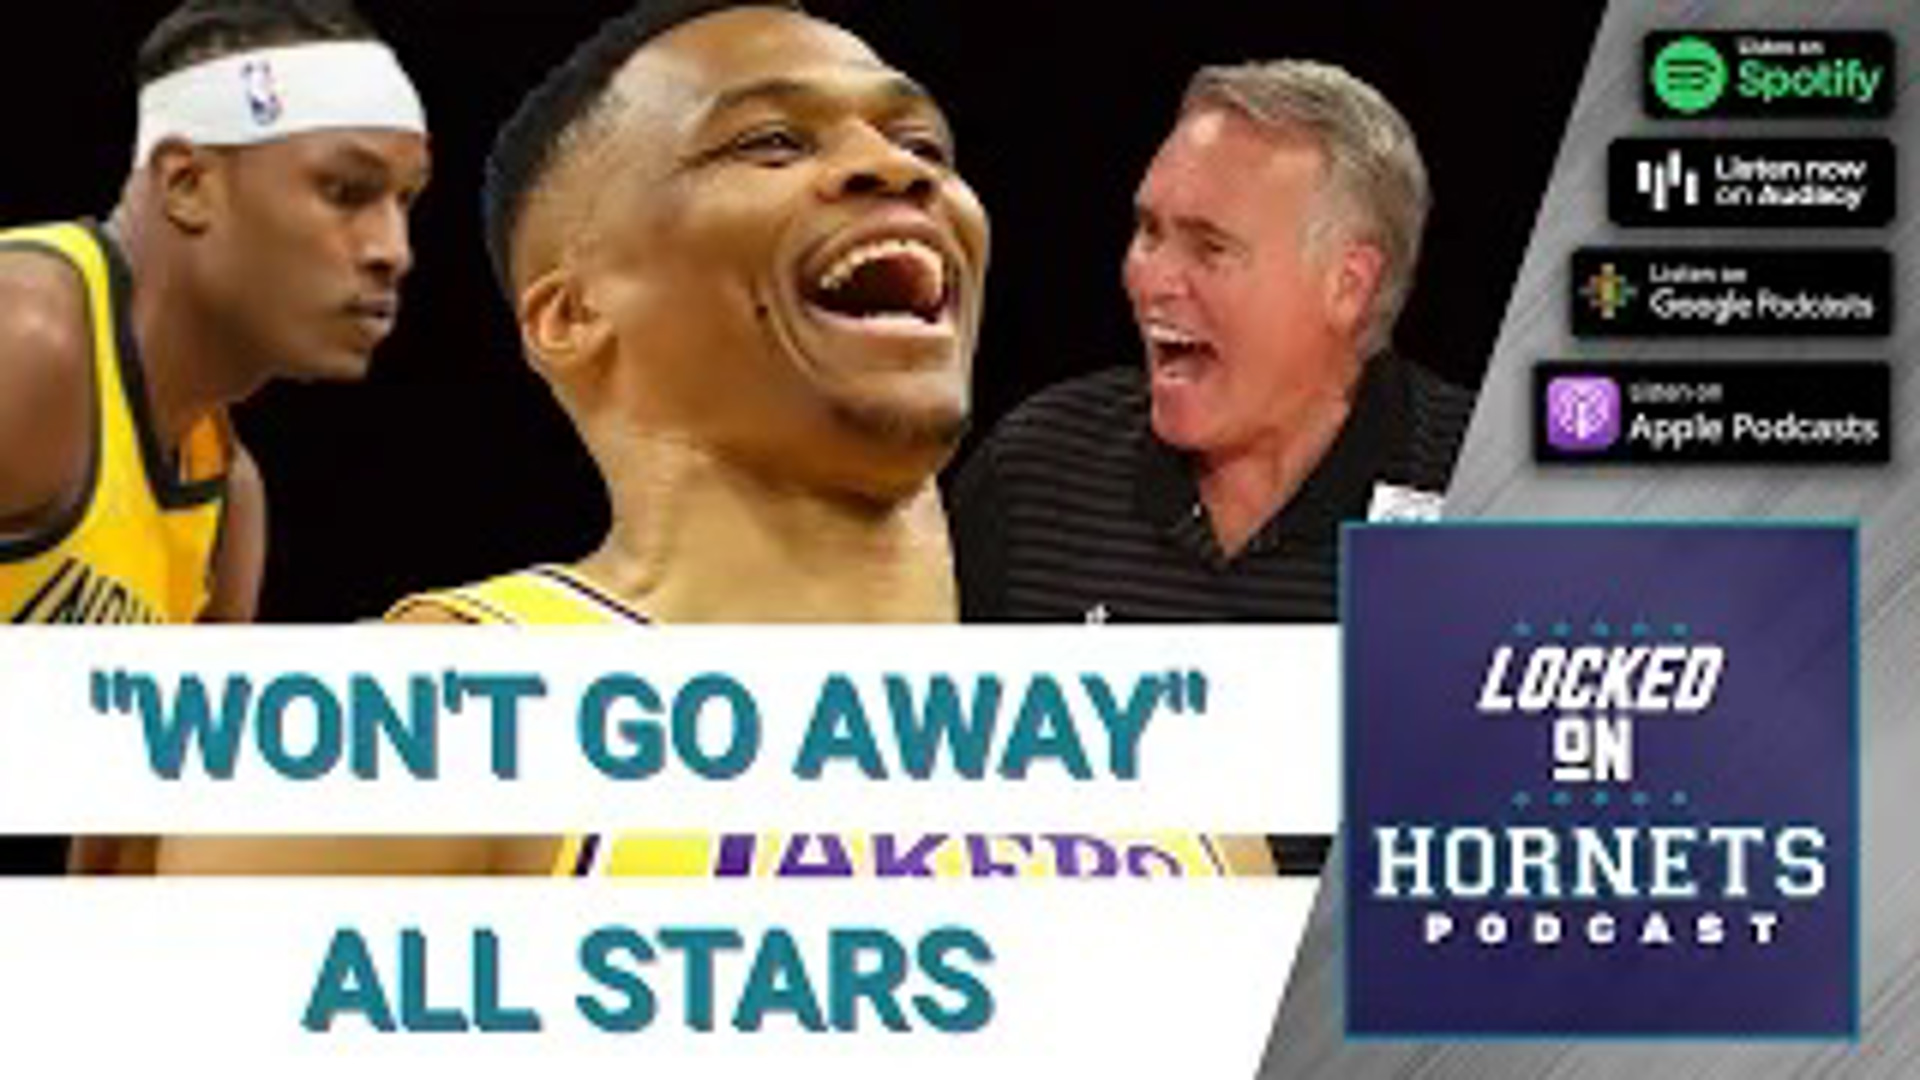 Trade rumors about Russell Westbrook, Myles Turner, Gordon Hayward and Terry Rozier continue to swirl ahead of the NBA Draft. That and more on Locked On Hornets!